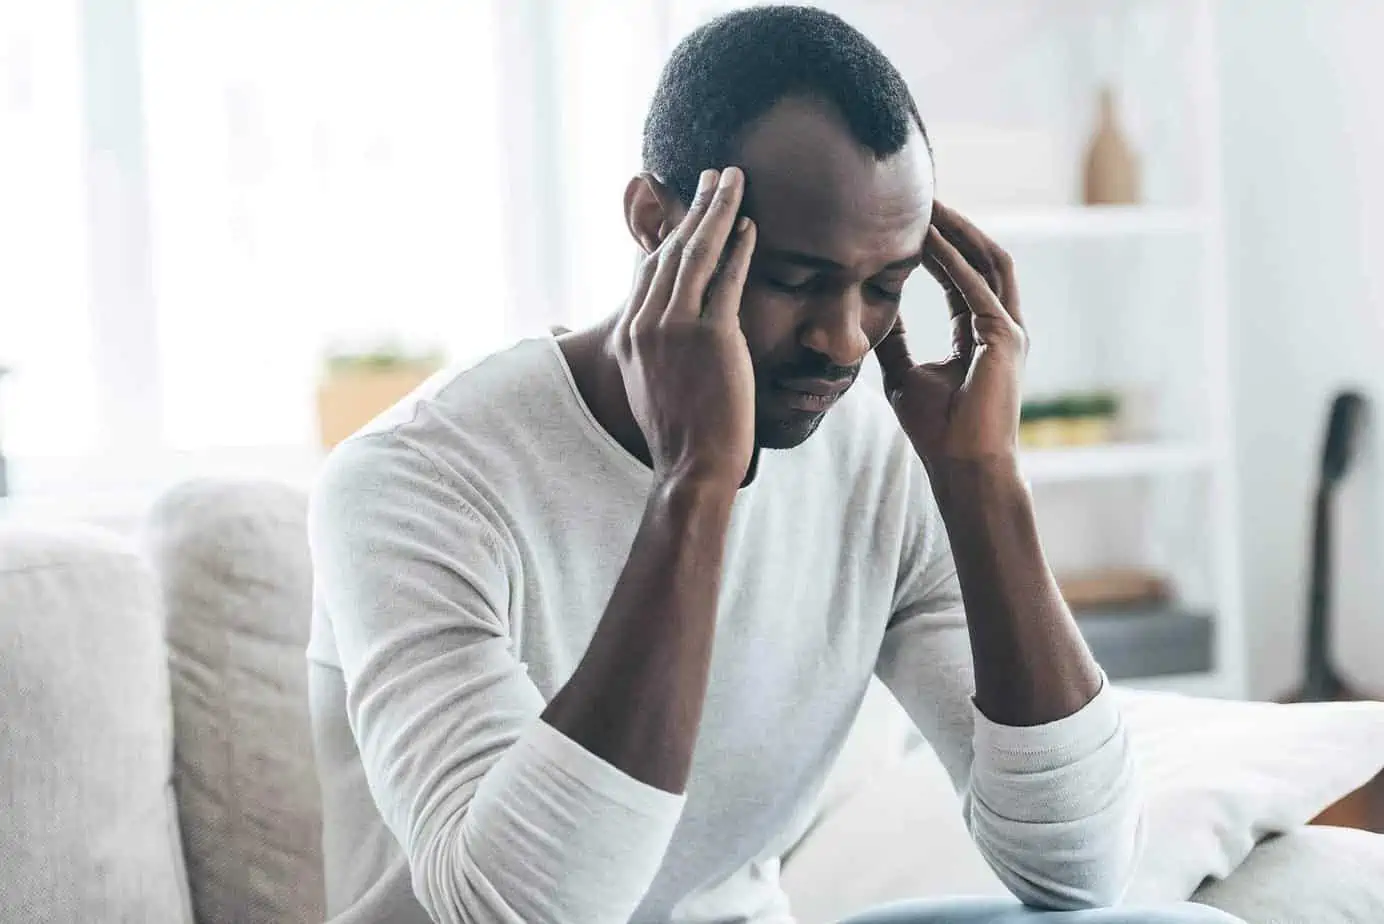 A man with a headache holding his head experiencing detox drug withdrawal symptoms.